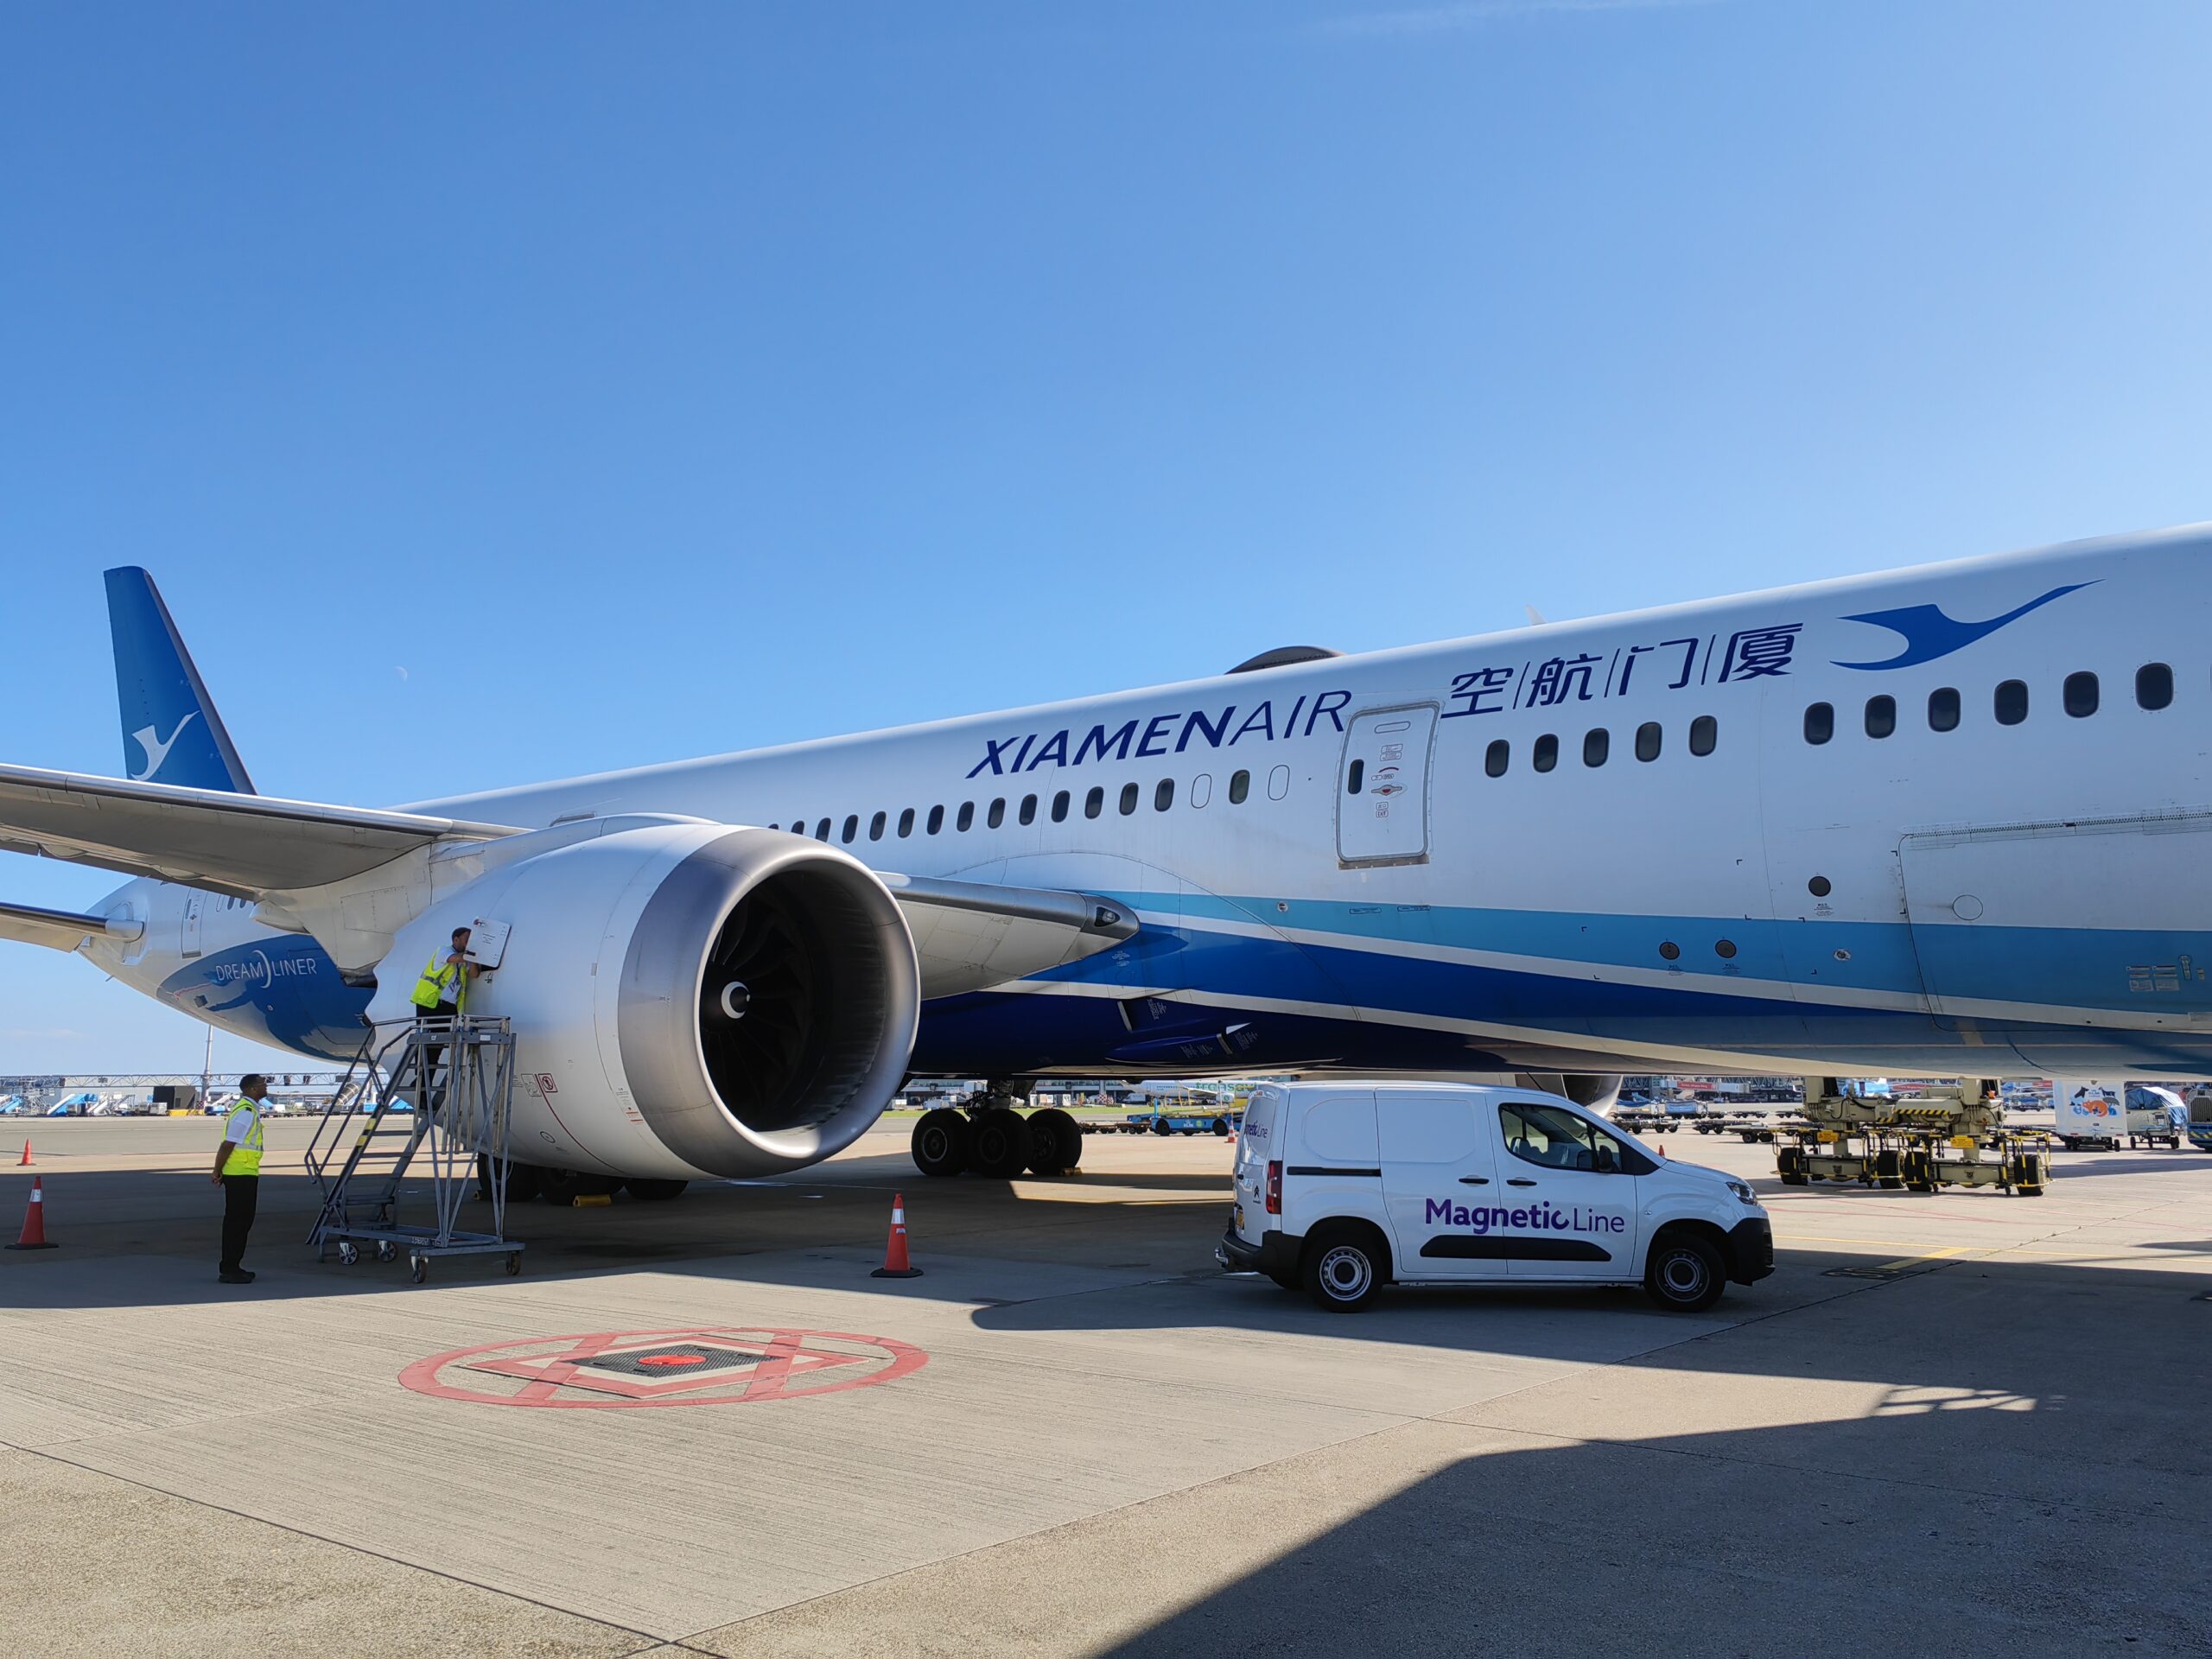 Magnetic Line Celebrates Significant Growth Partnering with Xiamen Airlines